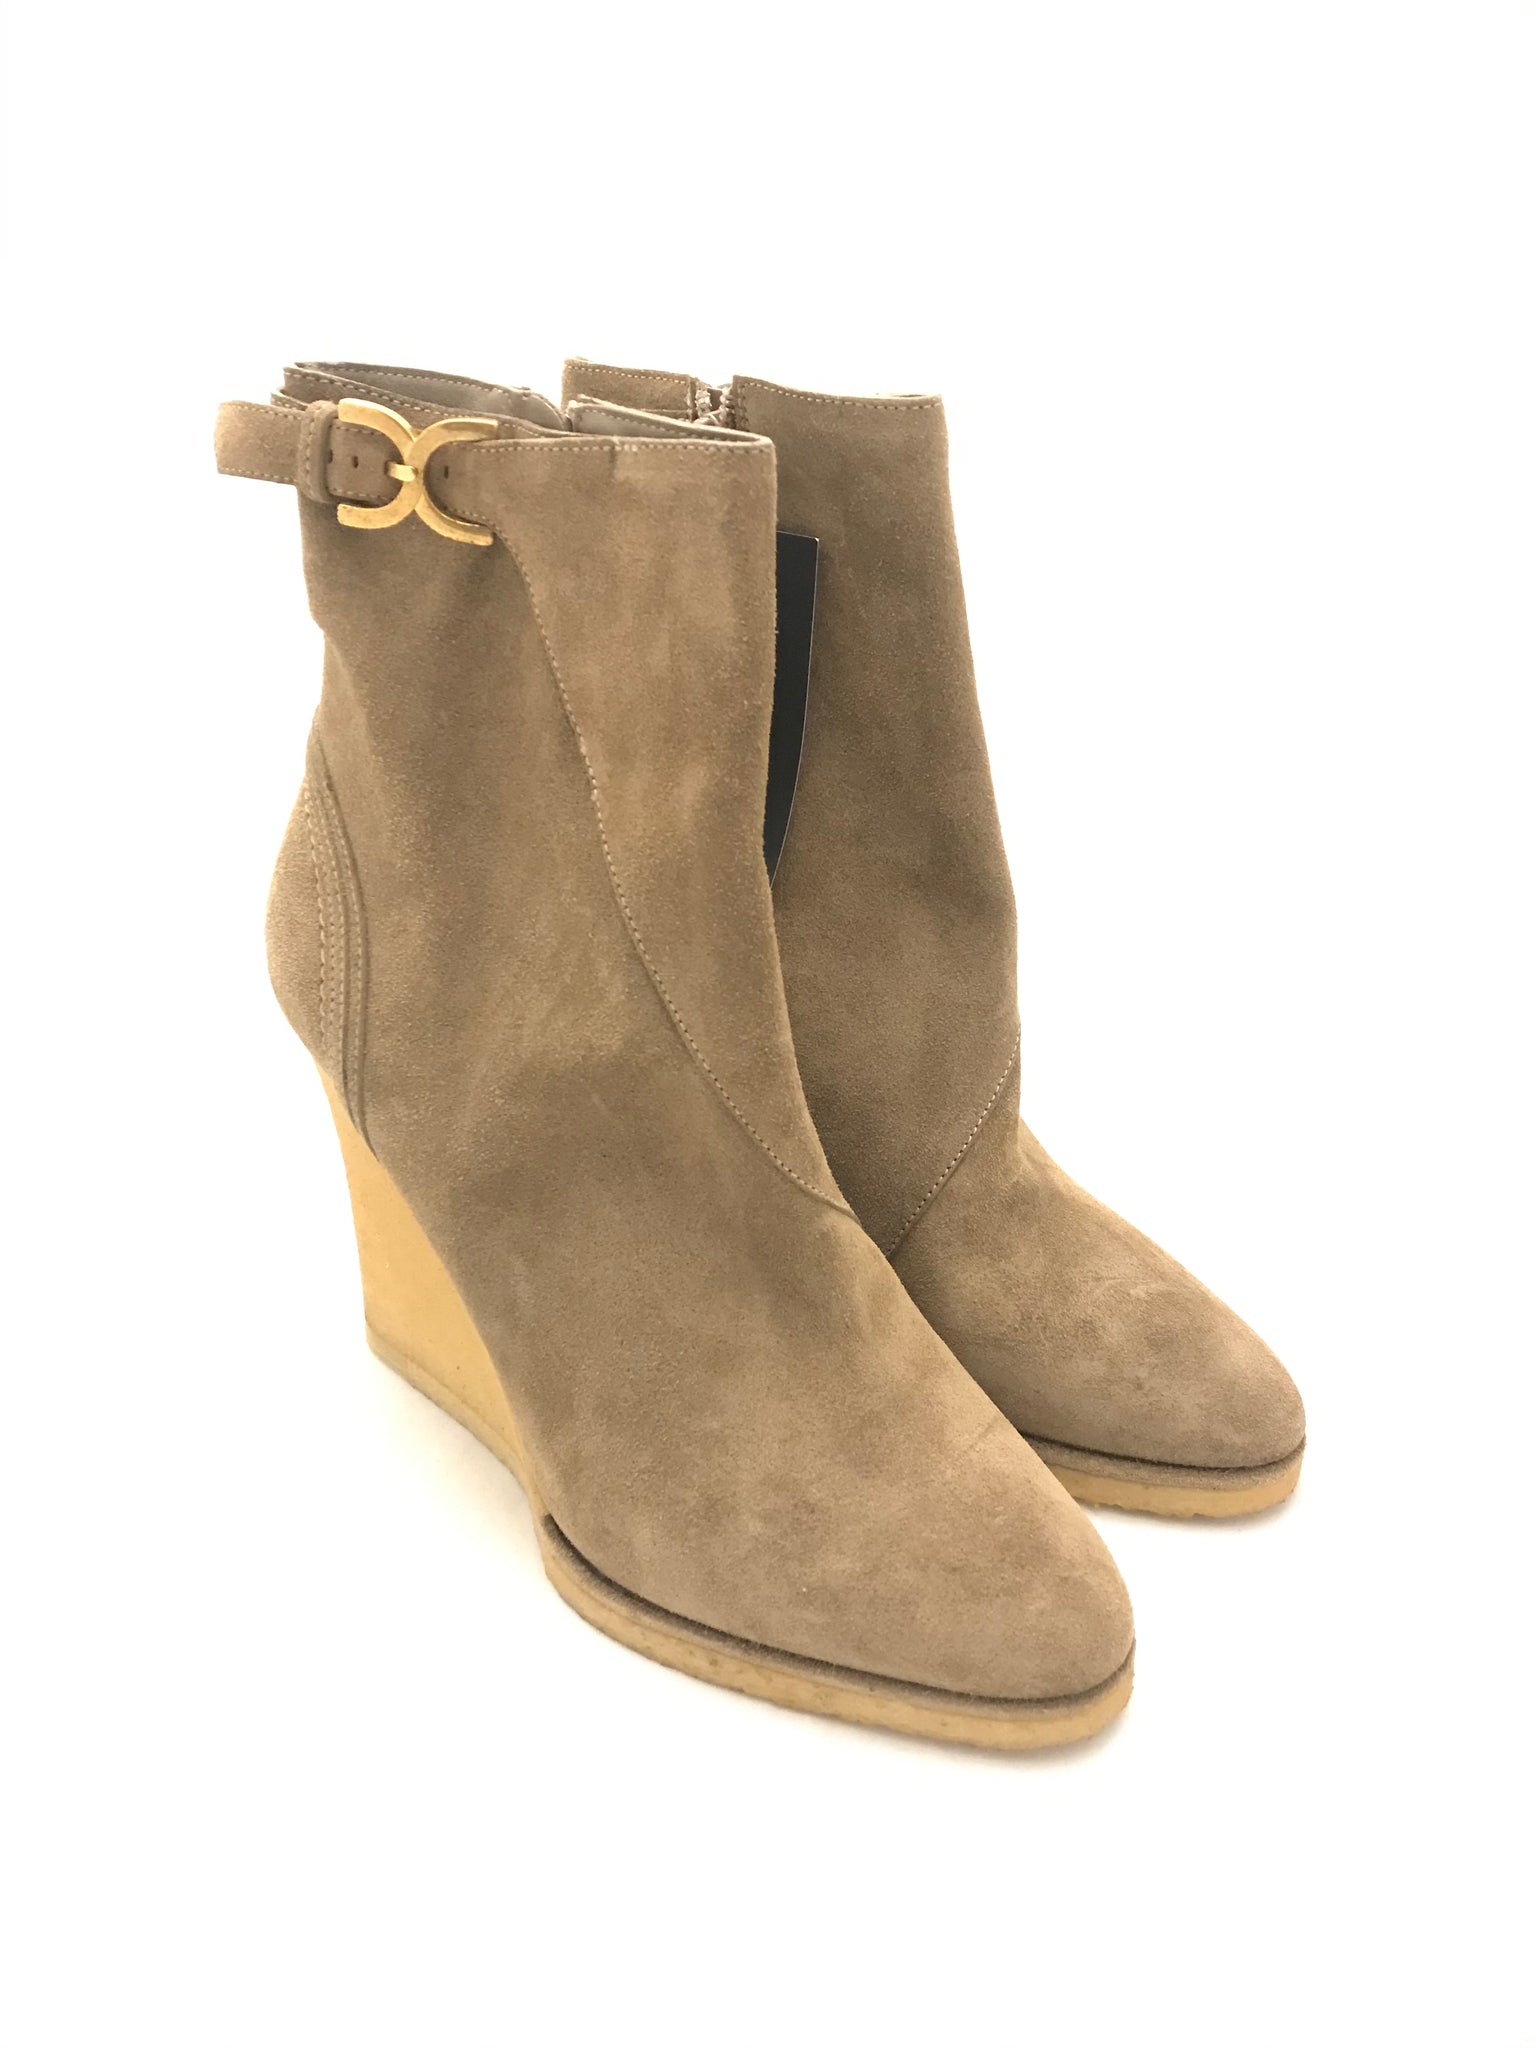 Isabella's Wardrobe Chloe Suede Wedge Ankle Boots.